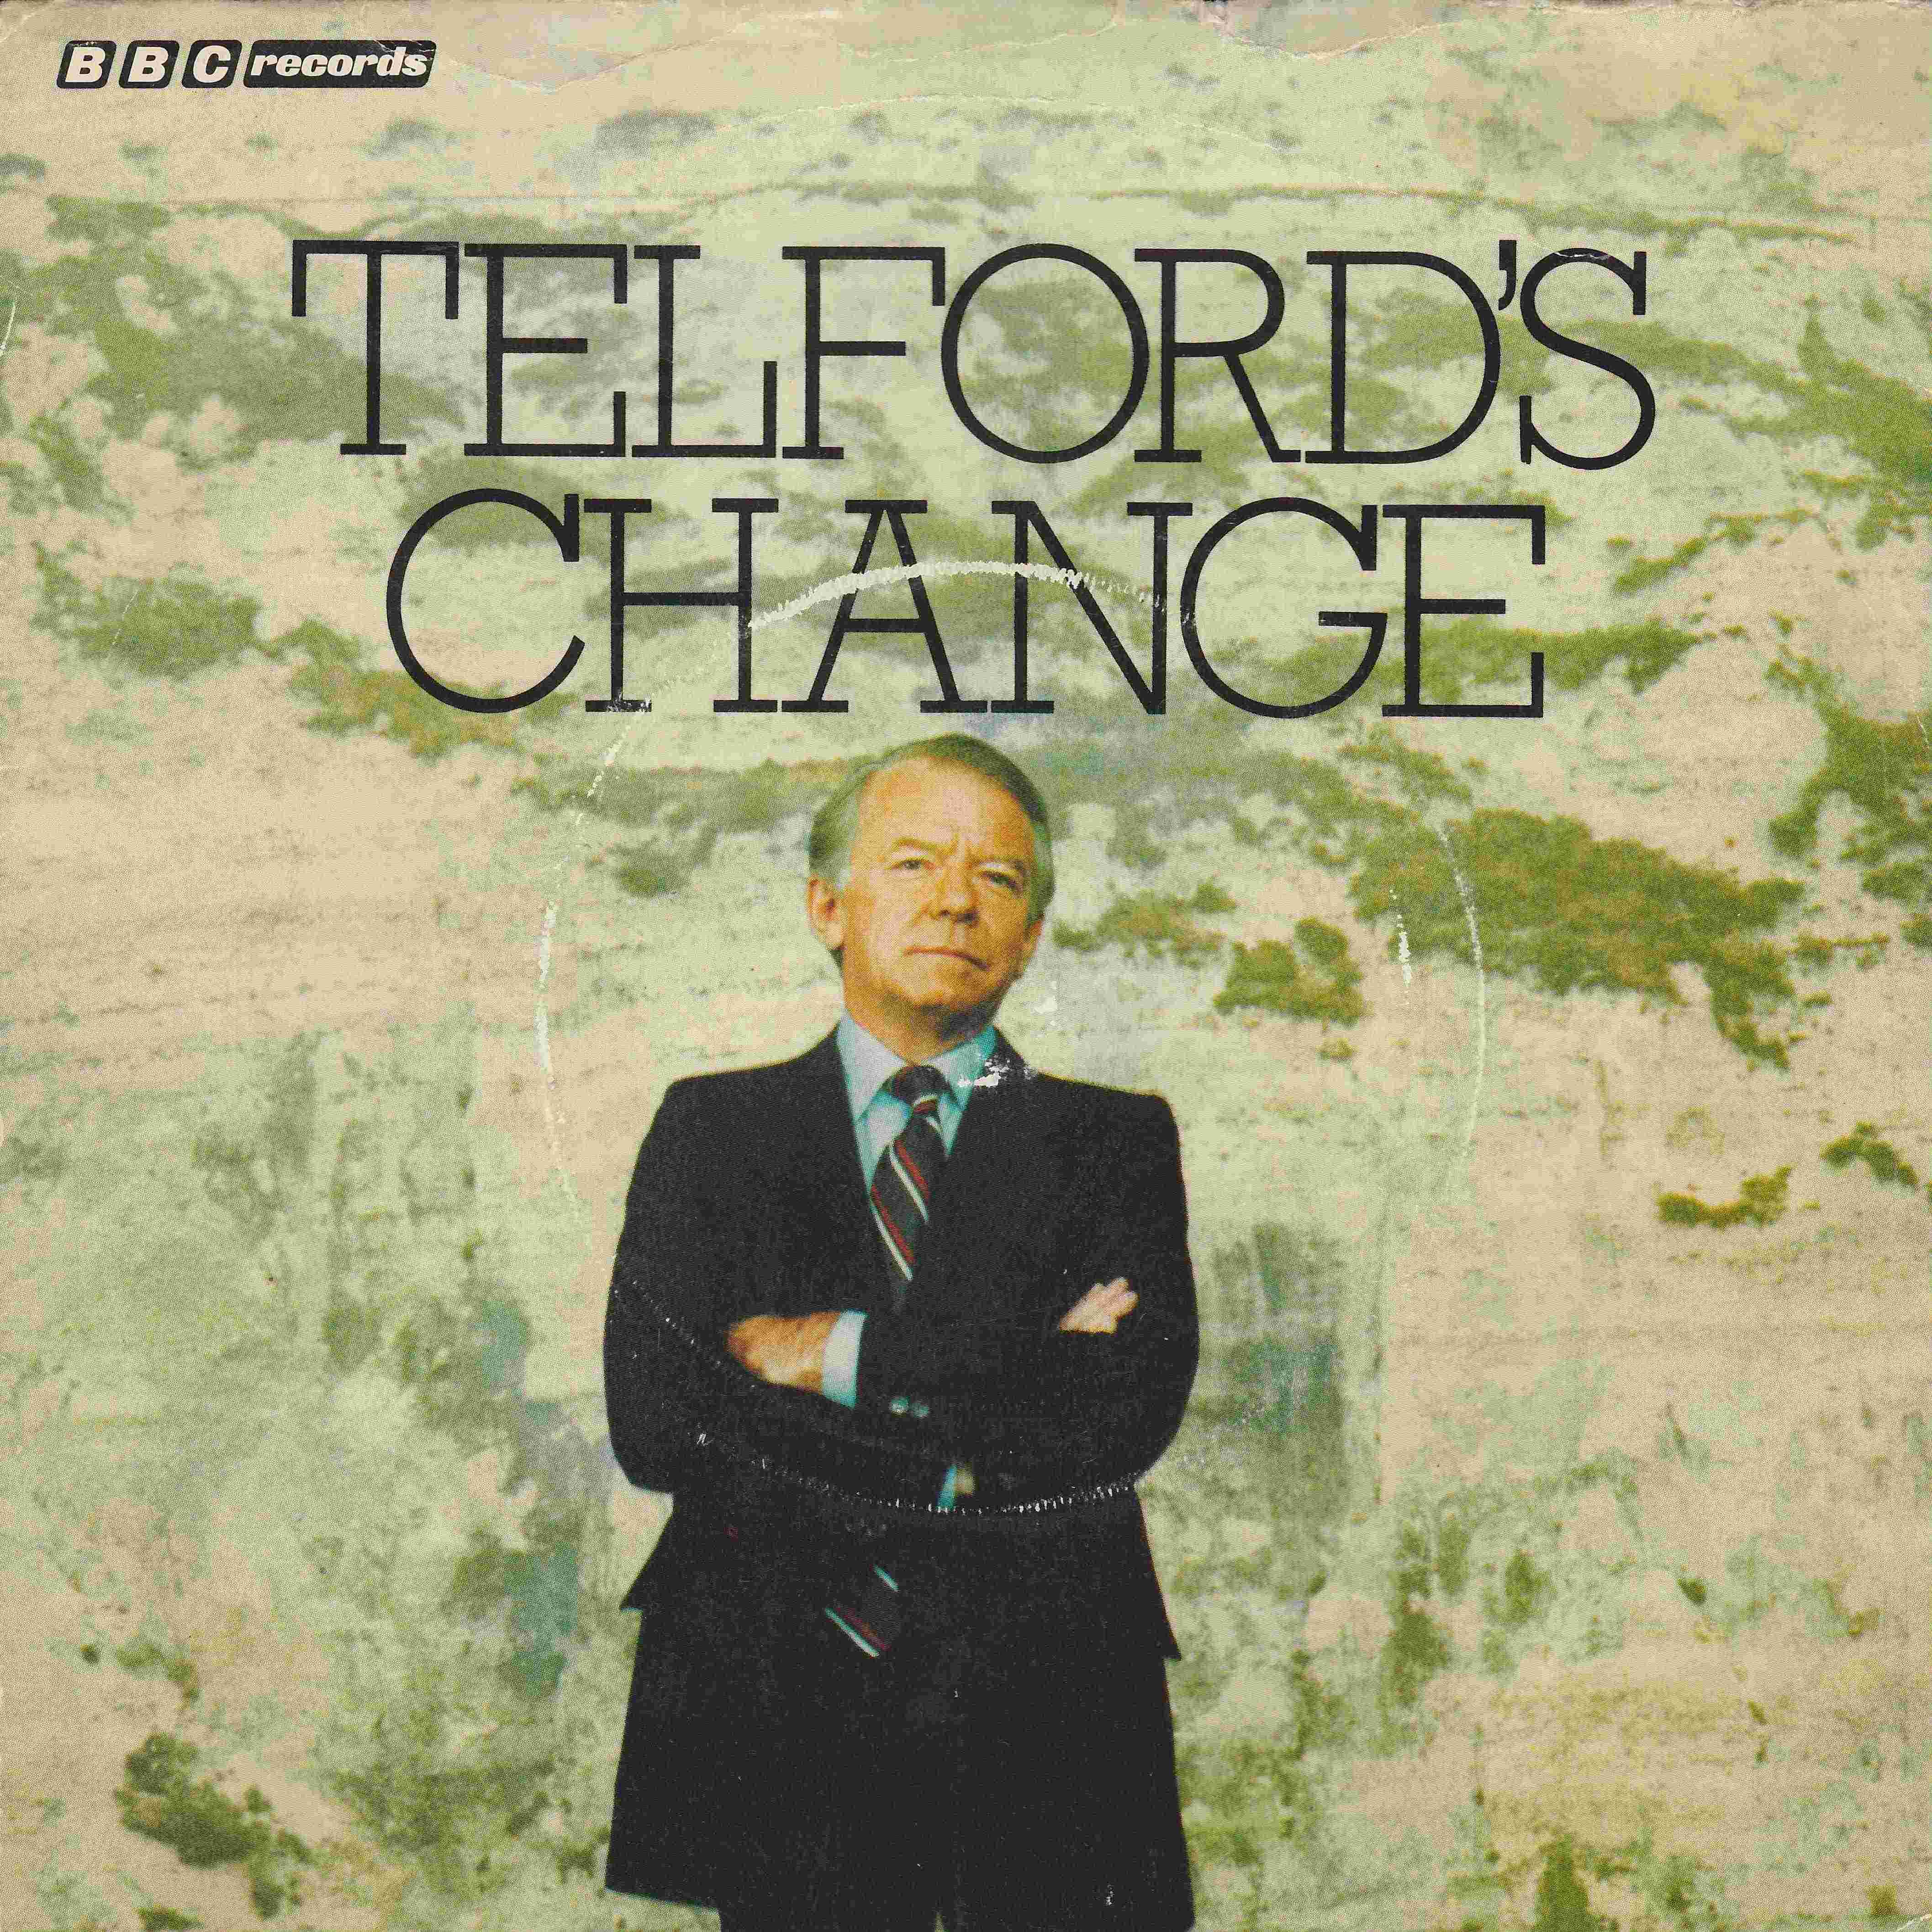 Picture of Telford's change by artist John Dankworth from the BBC singles - Records and Tapes library